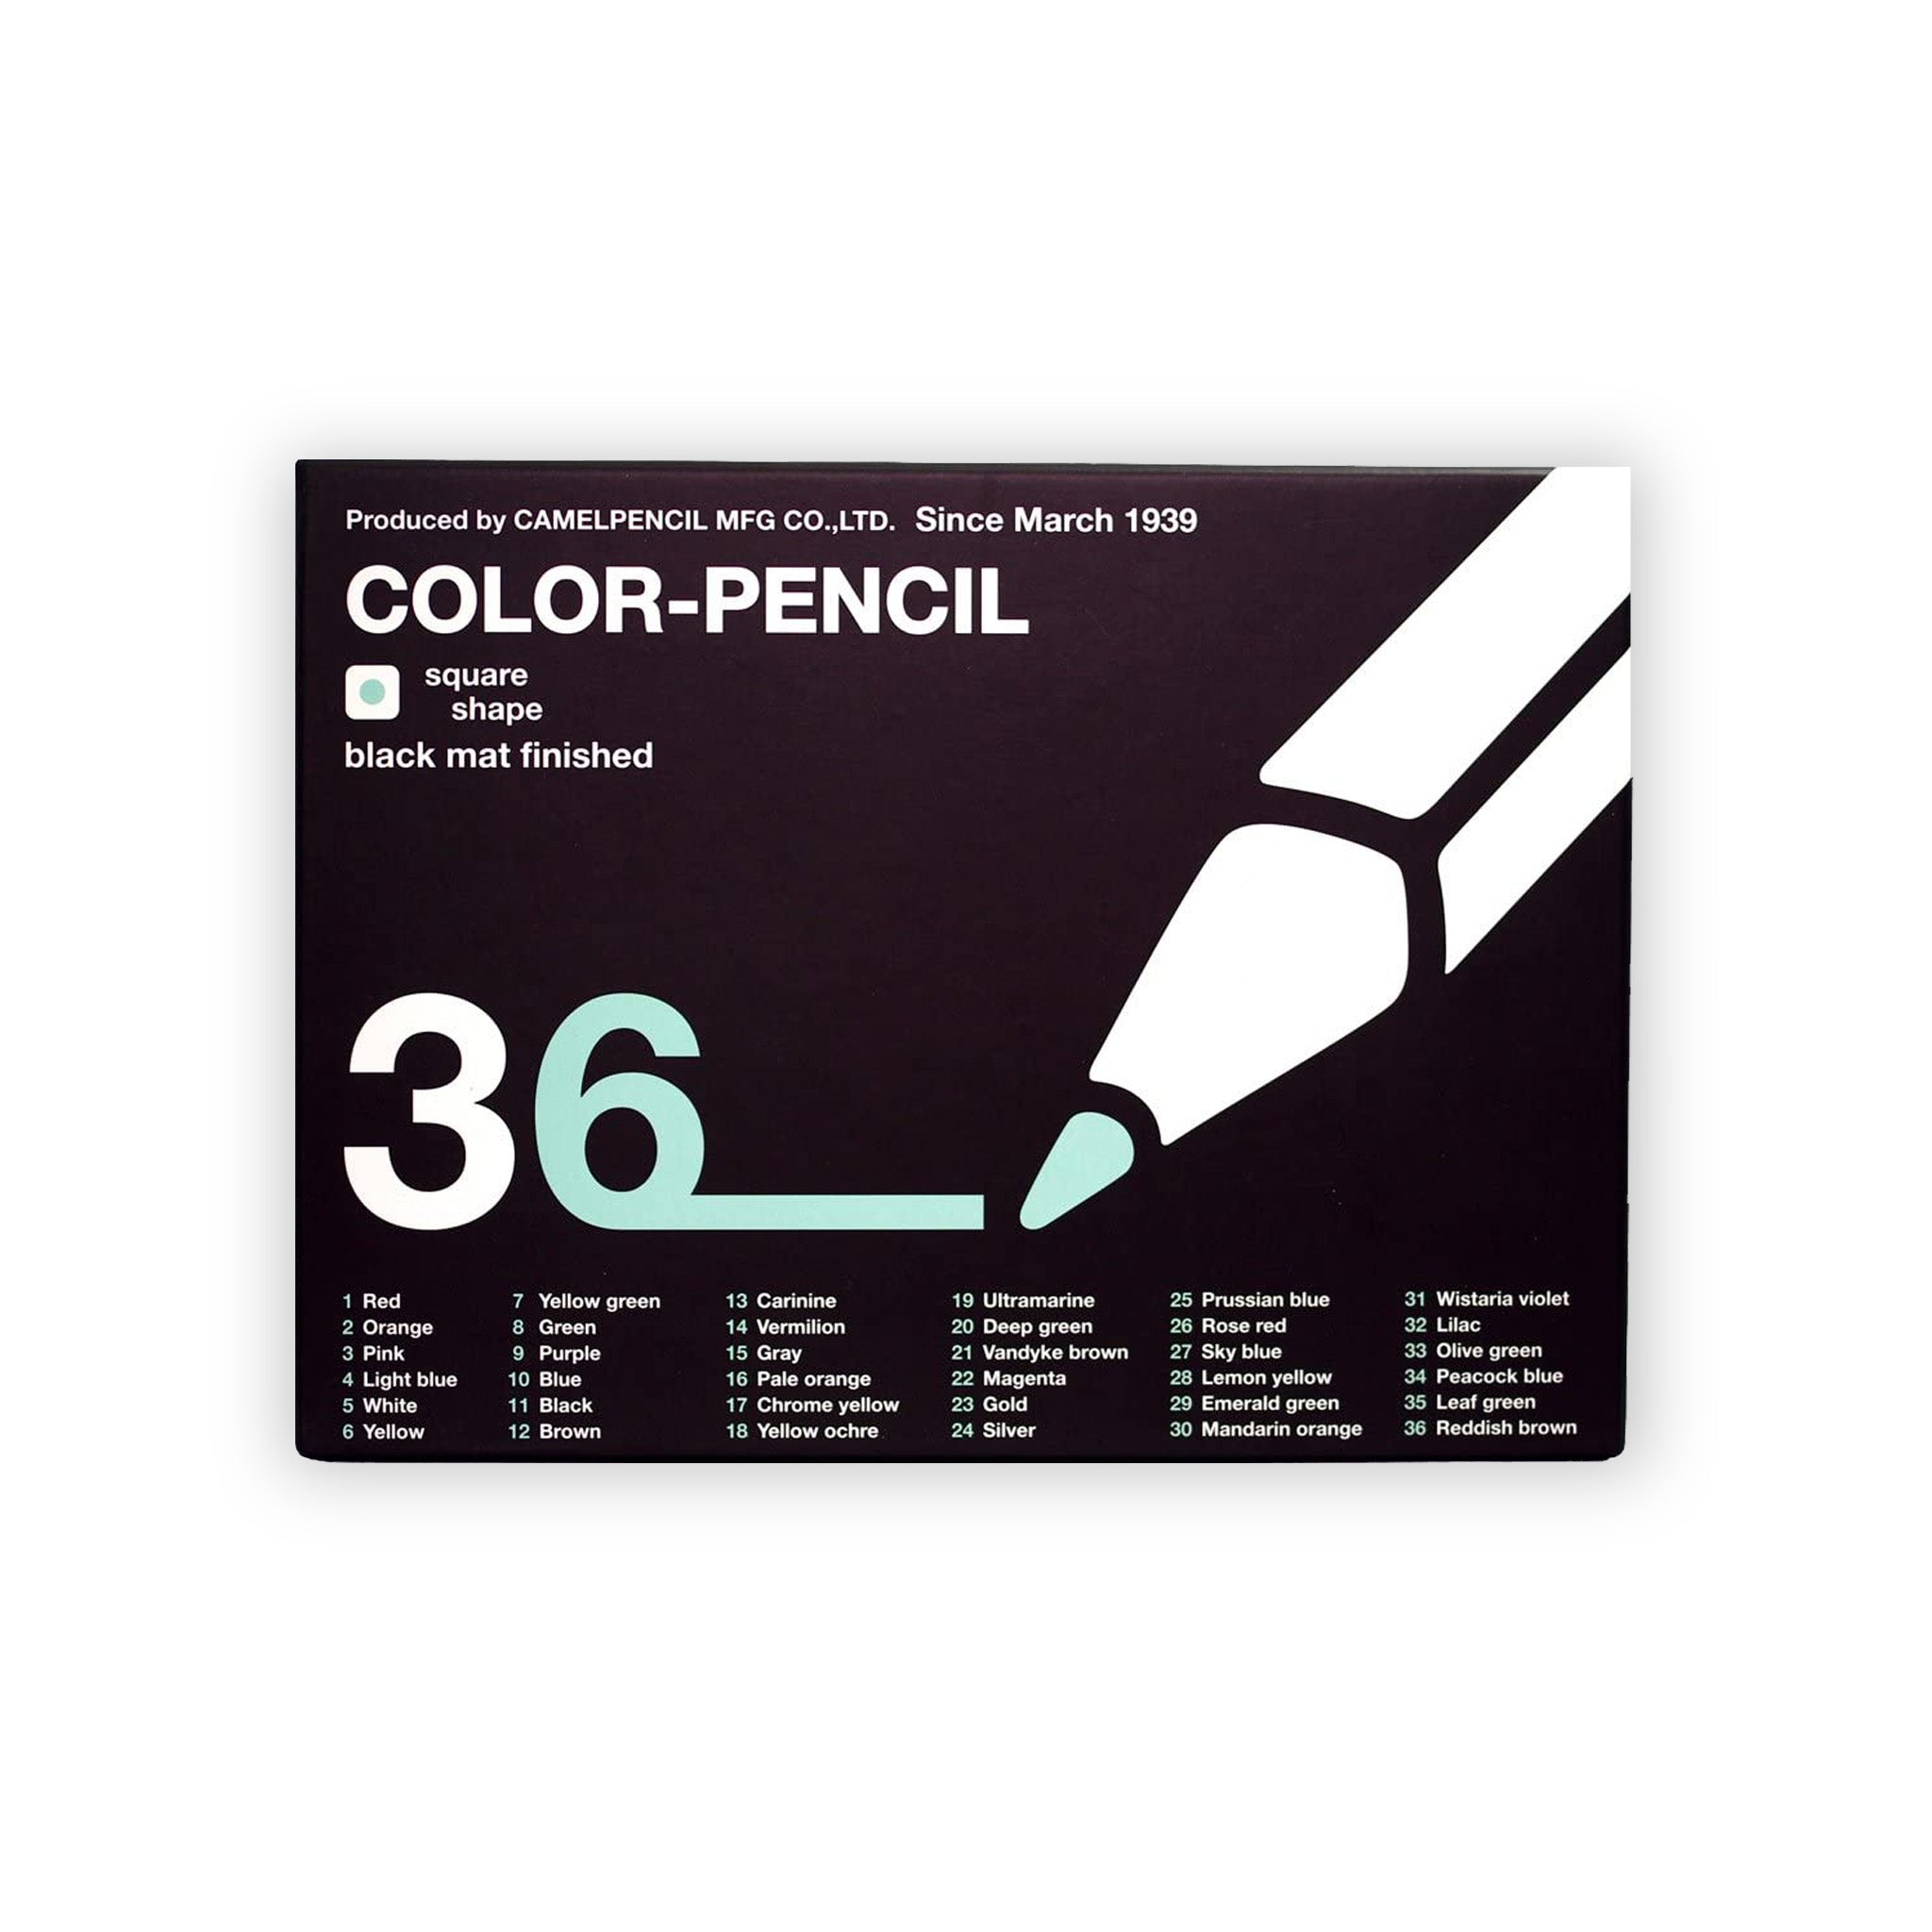 The closed cover of the full set. On a black box in white there is a graphic of a pencil drawing the number 36, and below is a list of all colors in the set.